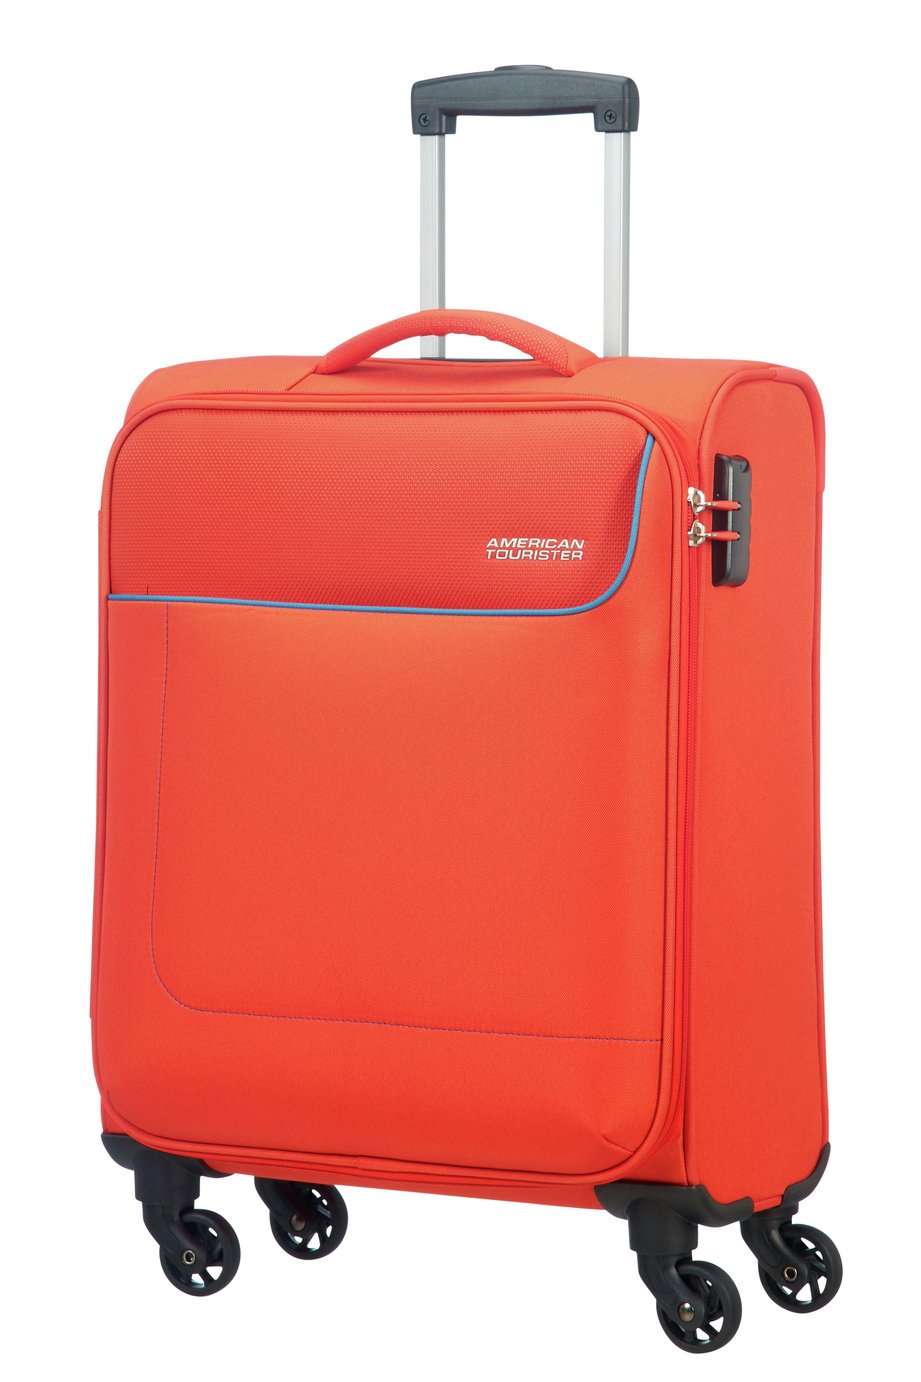 American Tourister Funshine Soft Cabin Suitcase Review